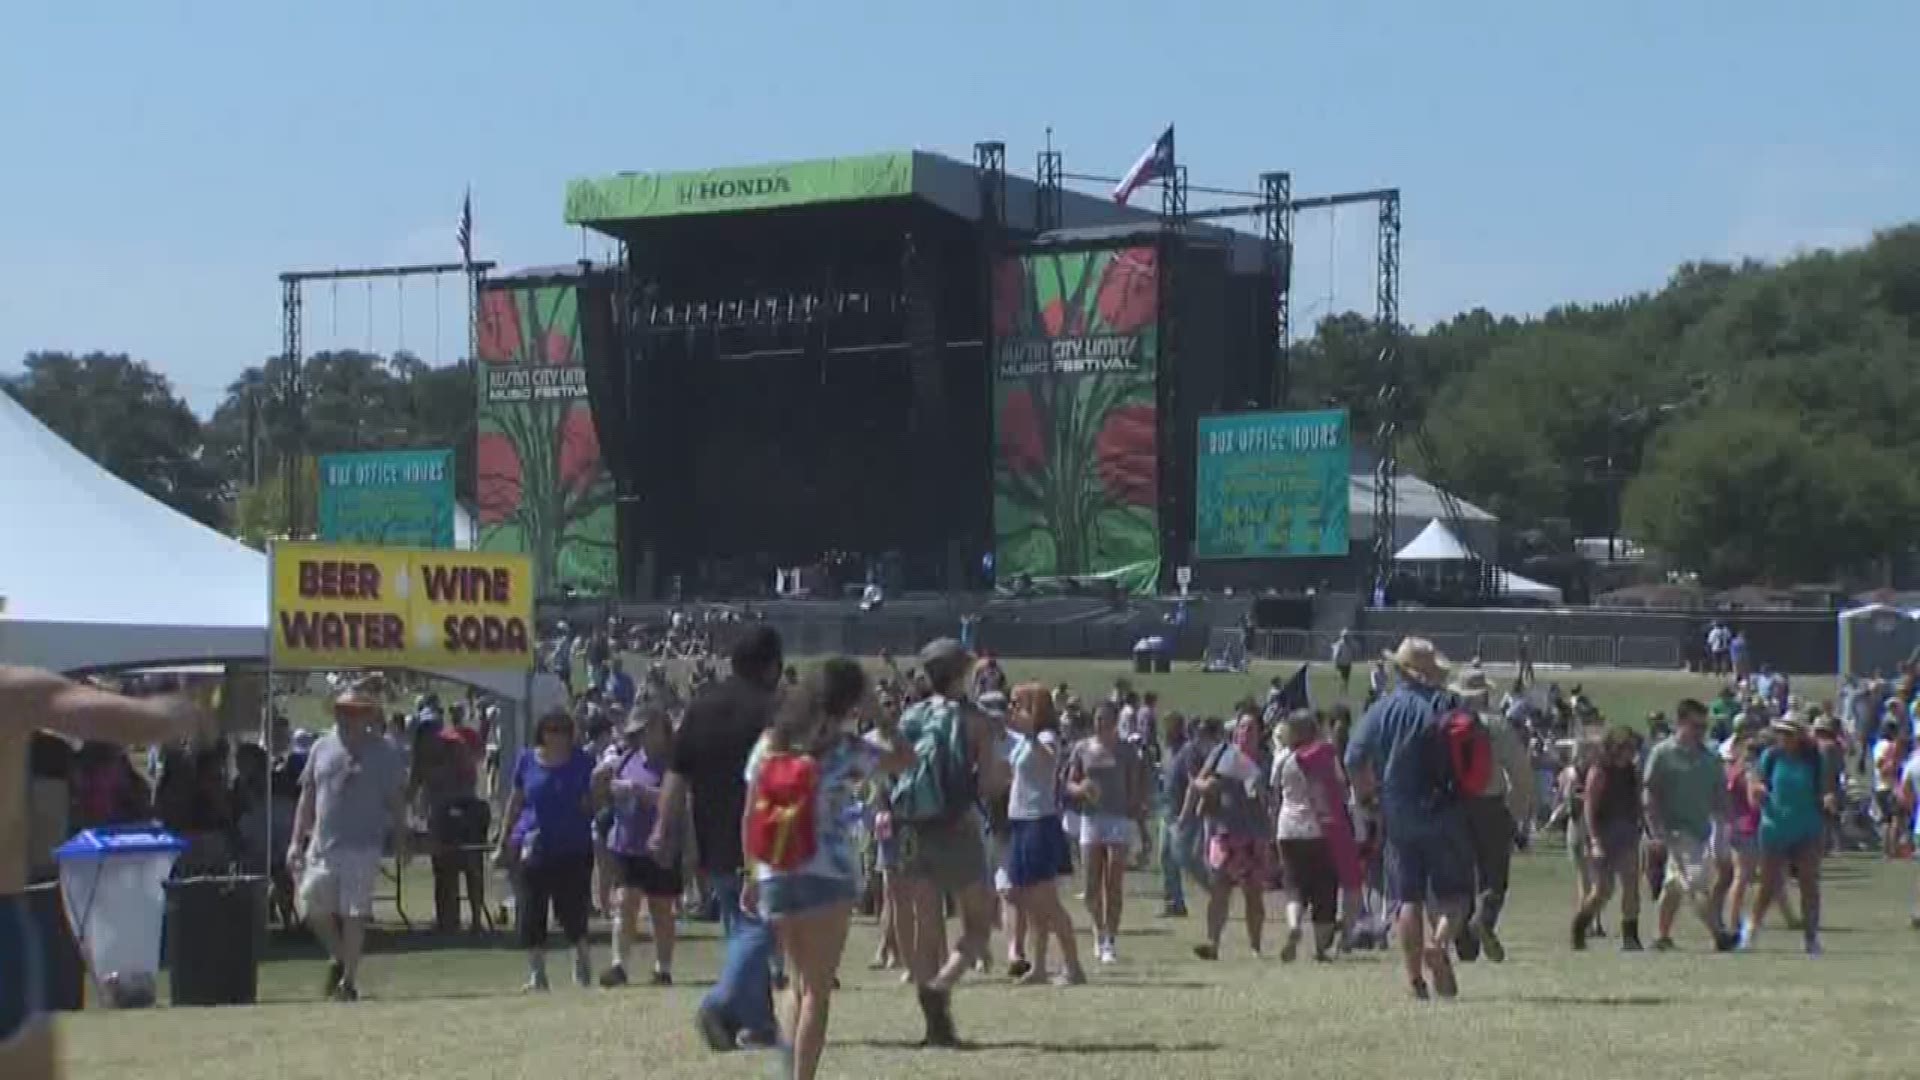 With a shooting at a large music event in Las Vegas, many wonder about the safety of the thousands of people who travel to Austin for the annual music festival Austin City Limits.